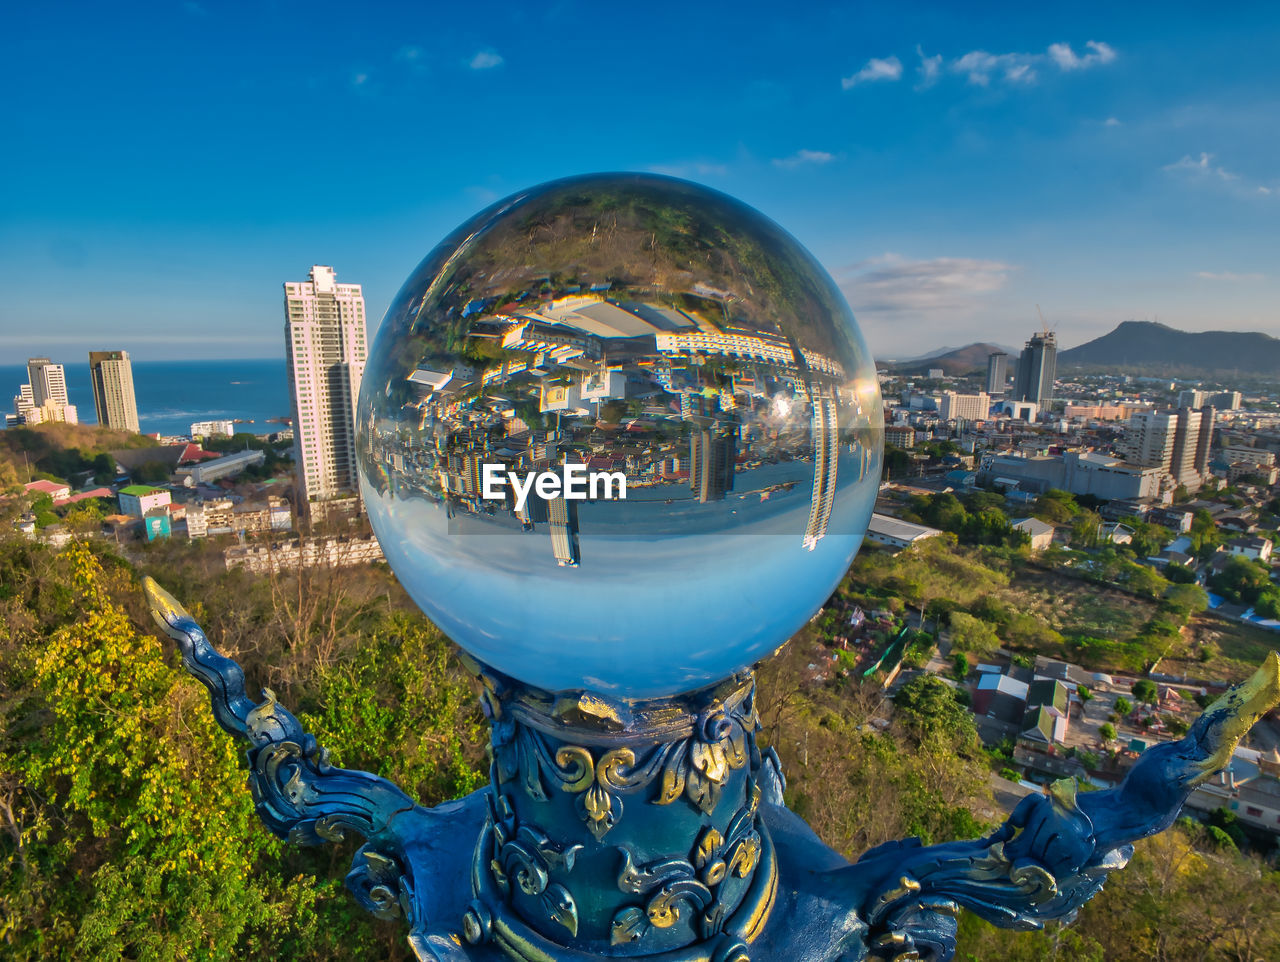 Photos of a king of nagas statue and big crystal ball view reflection of the sriracha city.